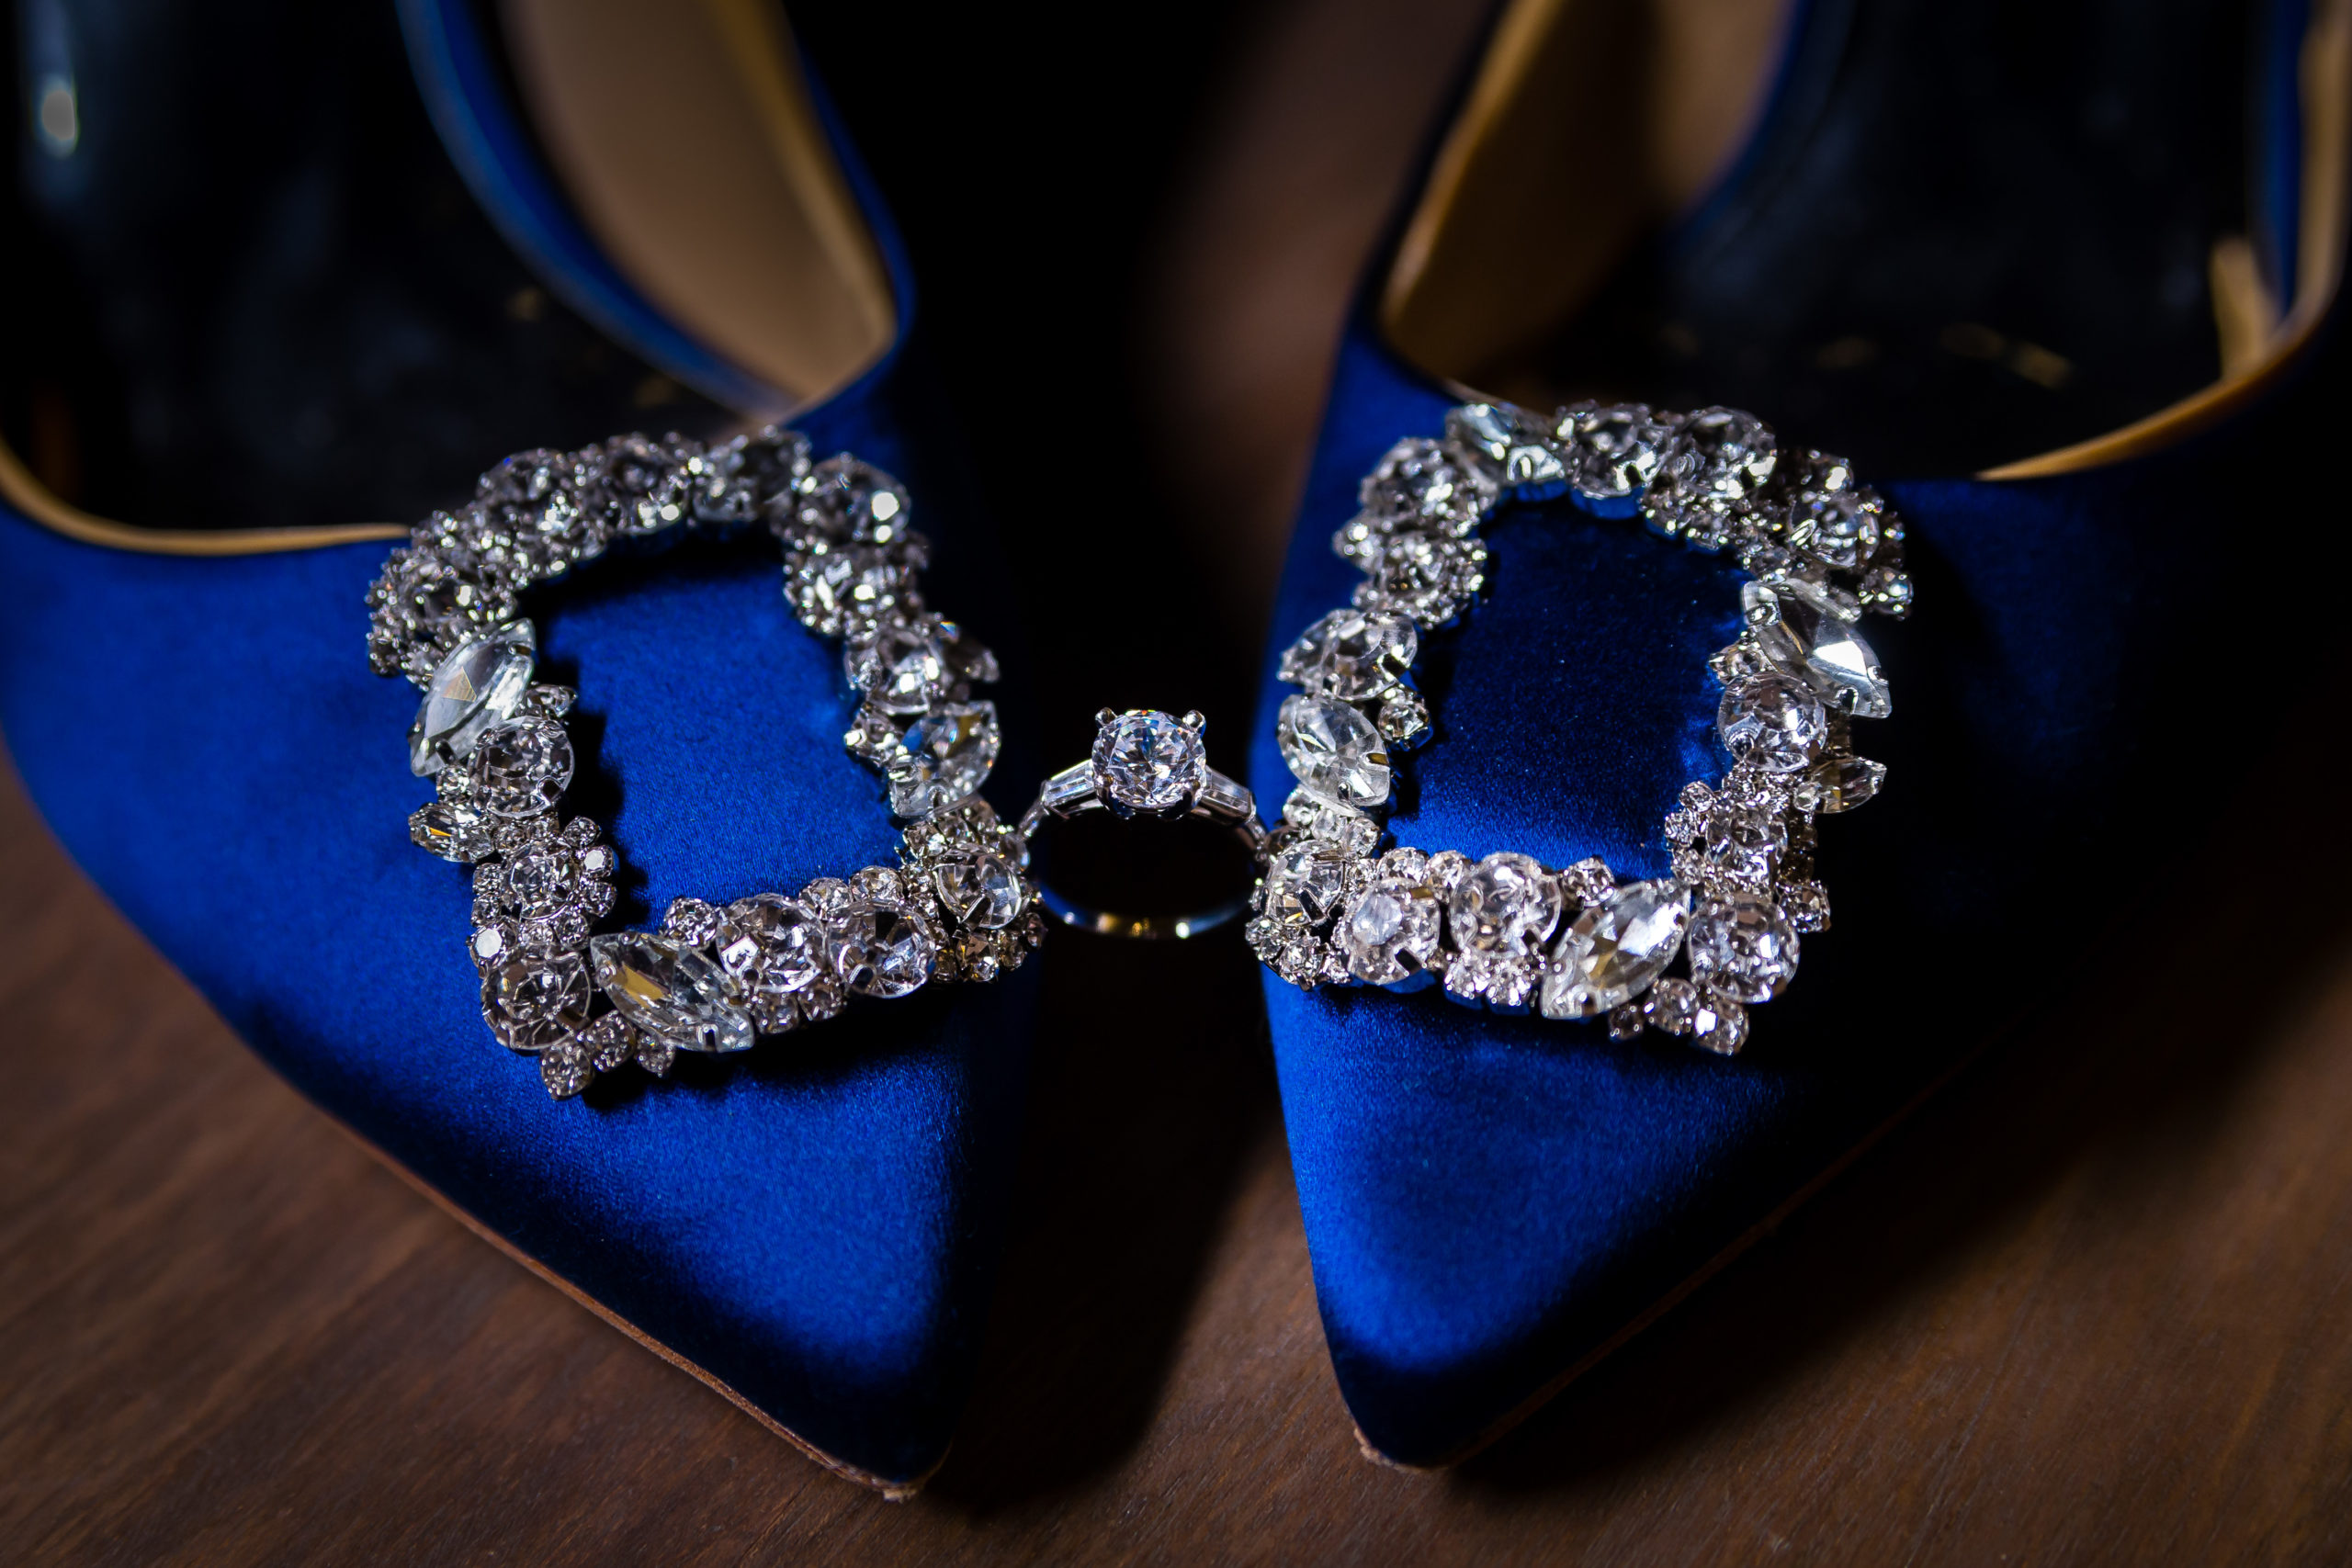 Engagement ring and wedding shoes